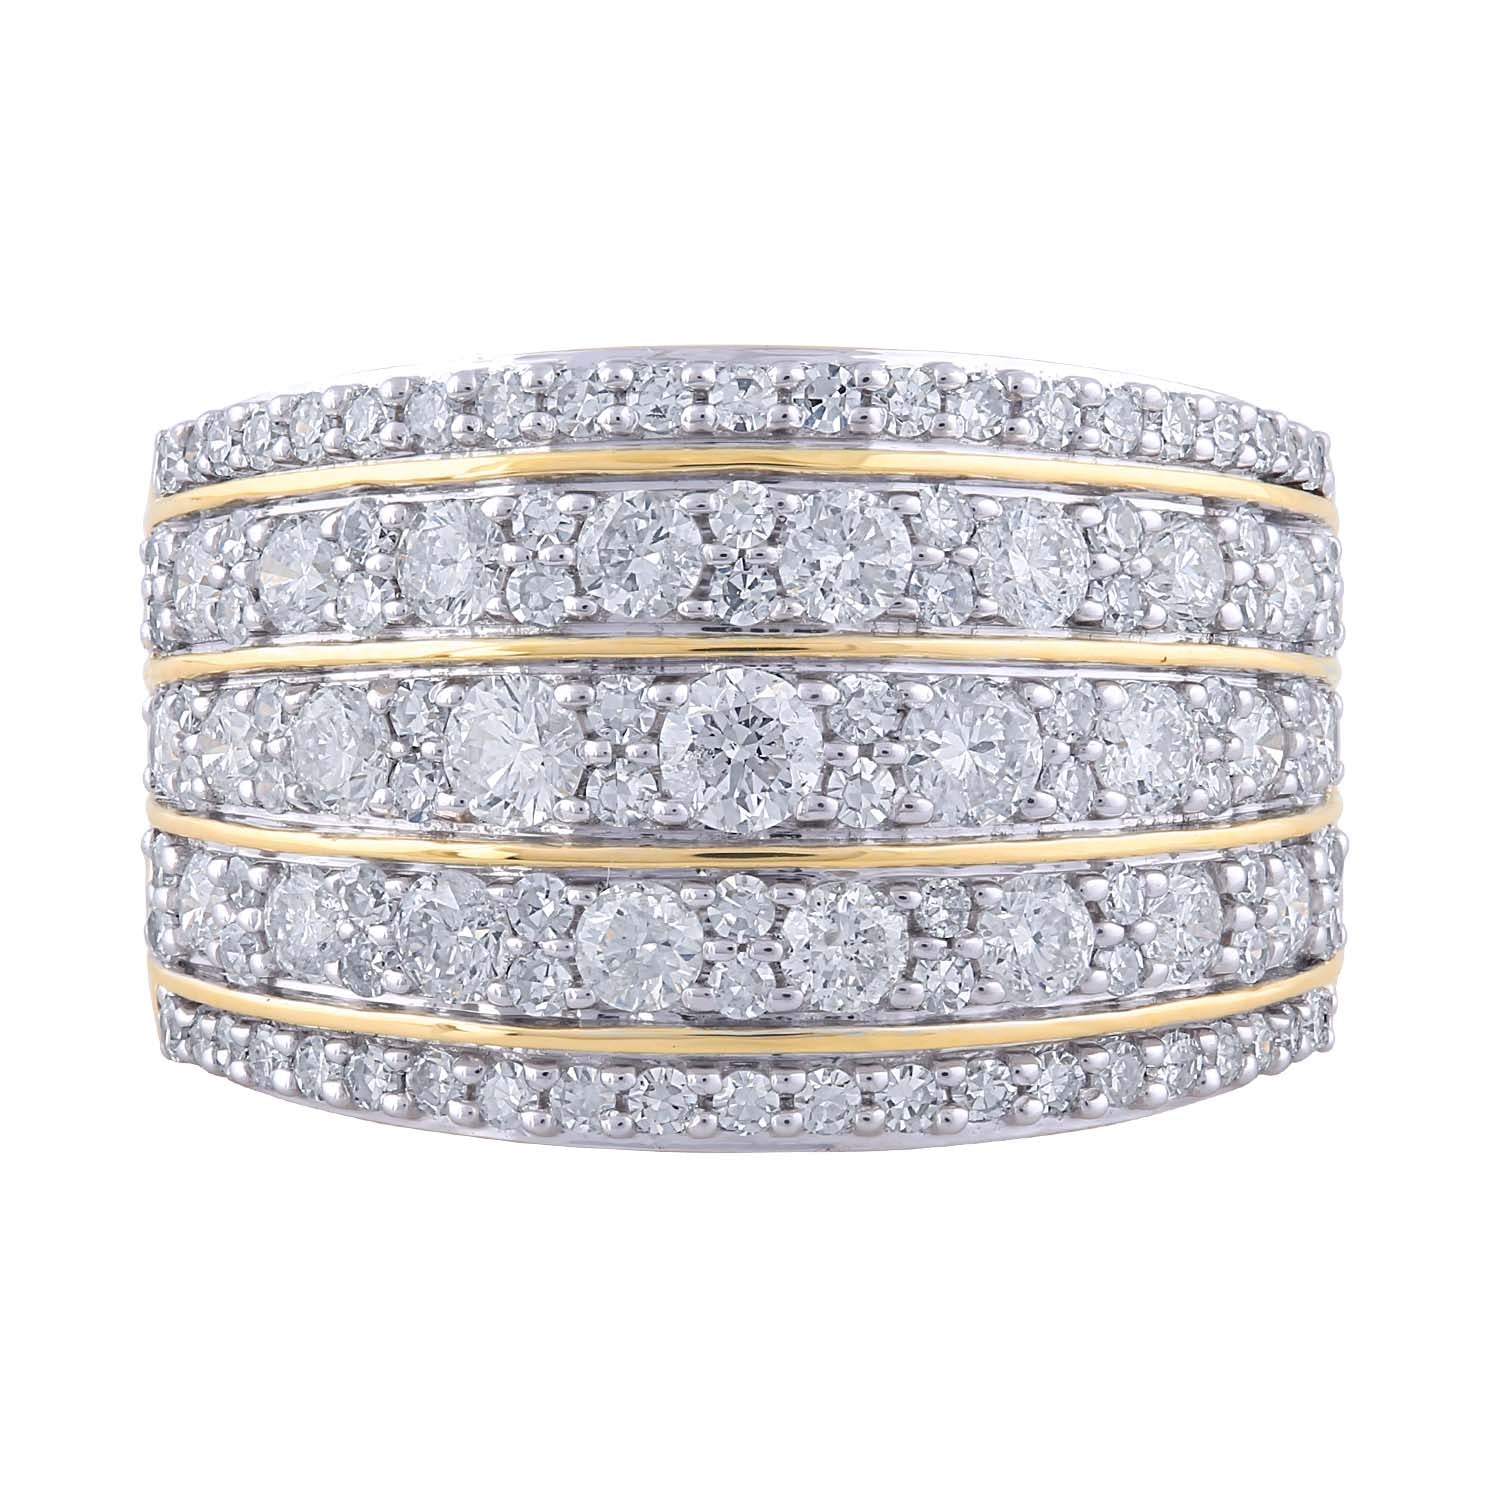 Multi Row Ring with 1.5ct Diamonds in 18K Yellow Gold